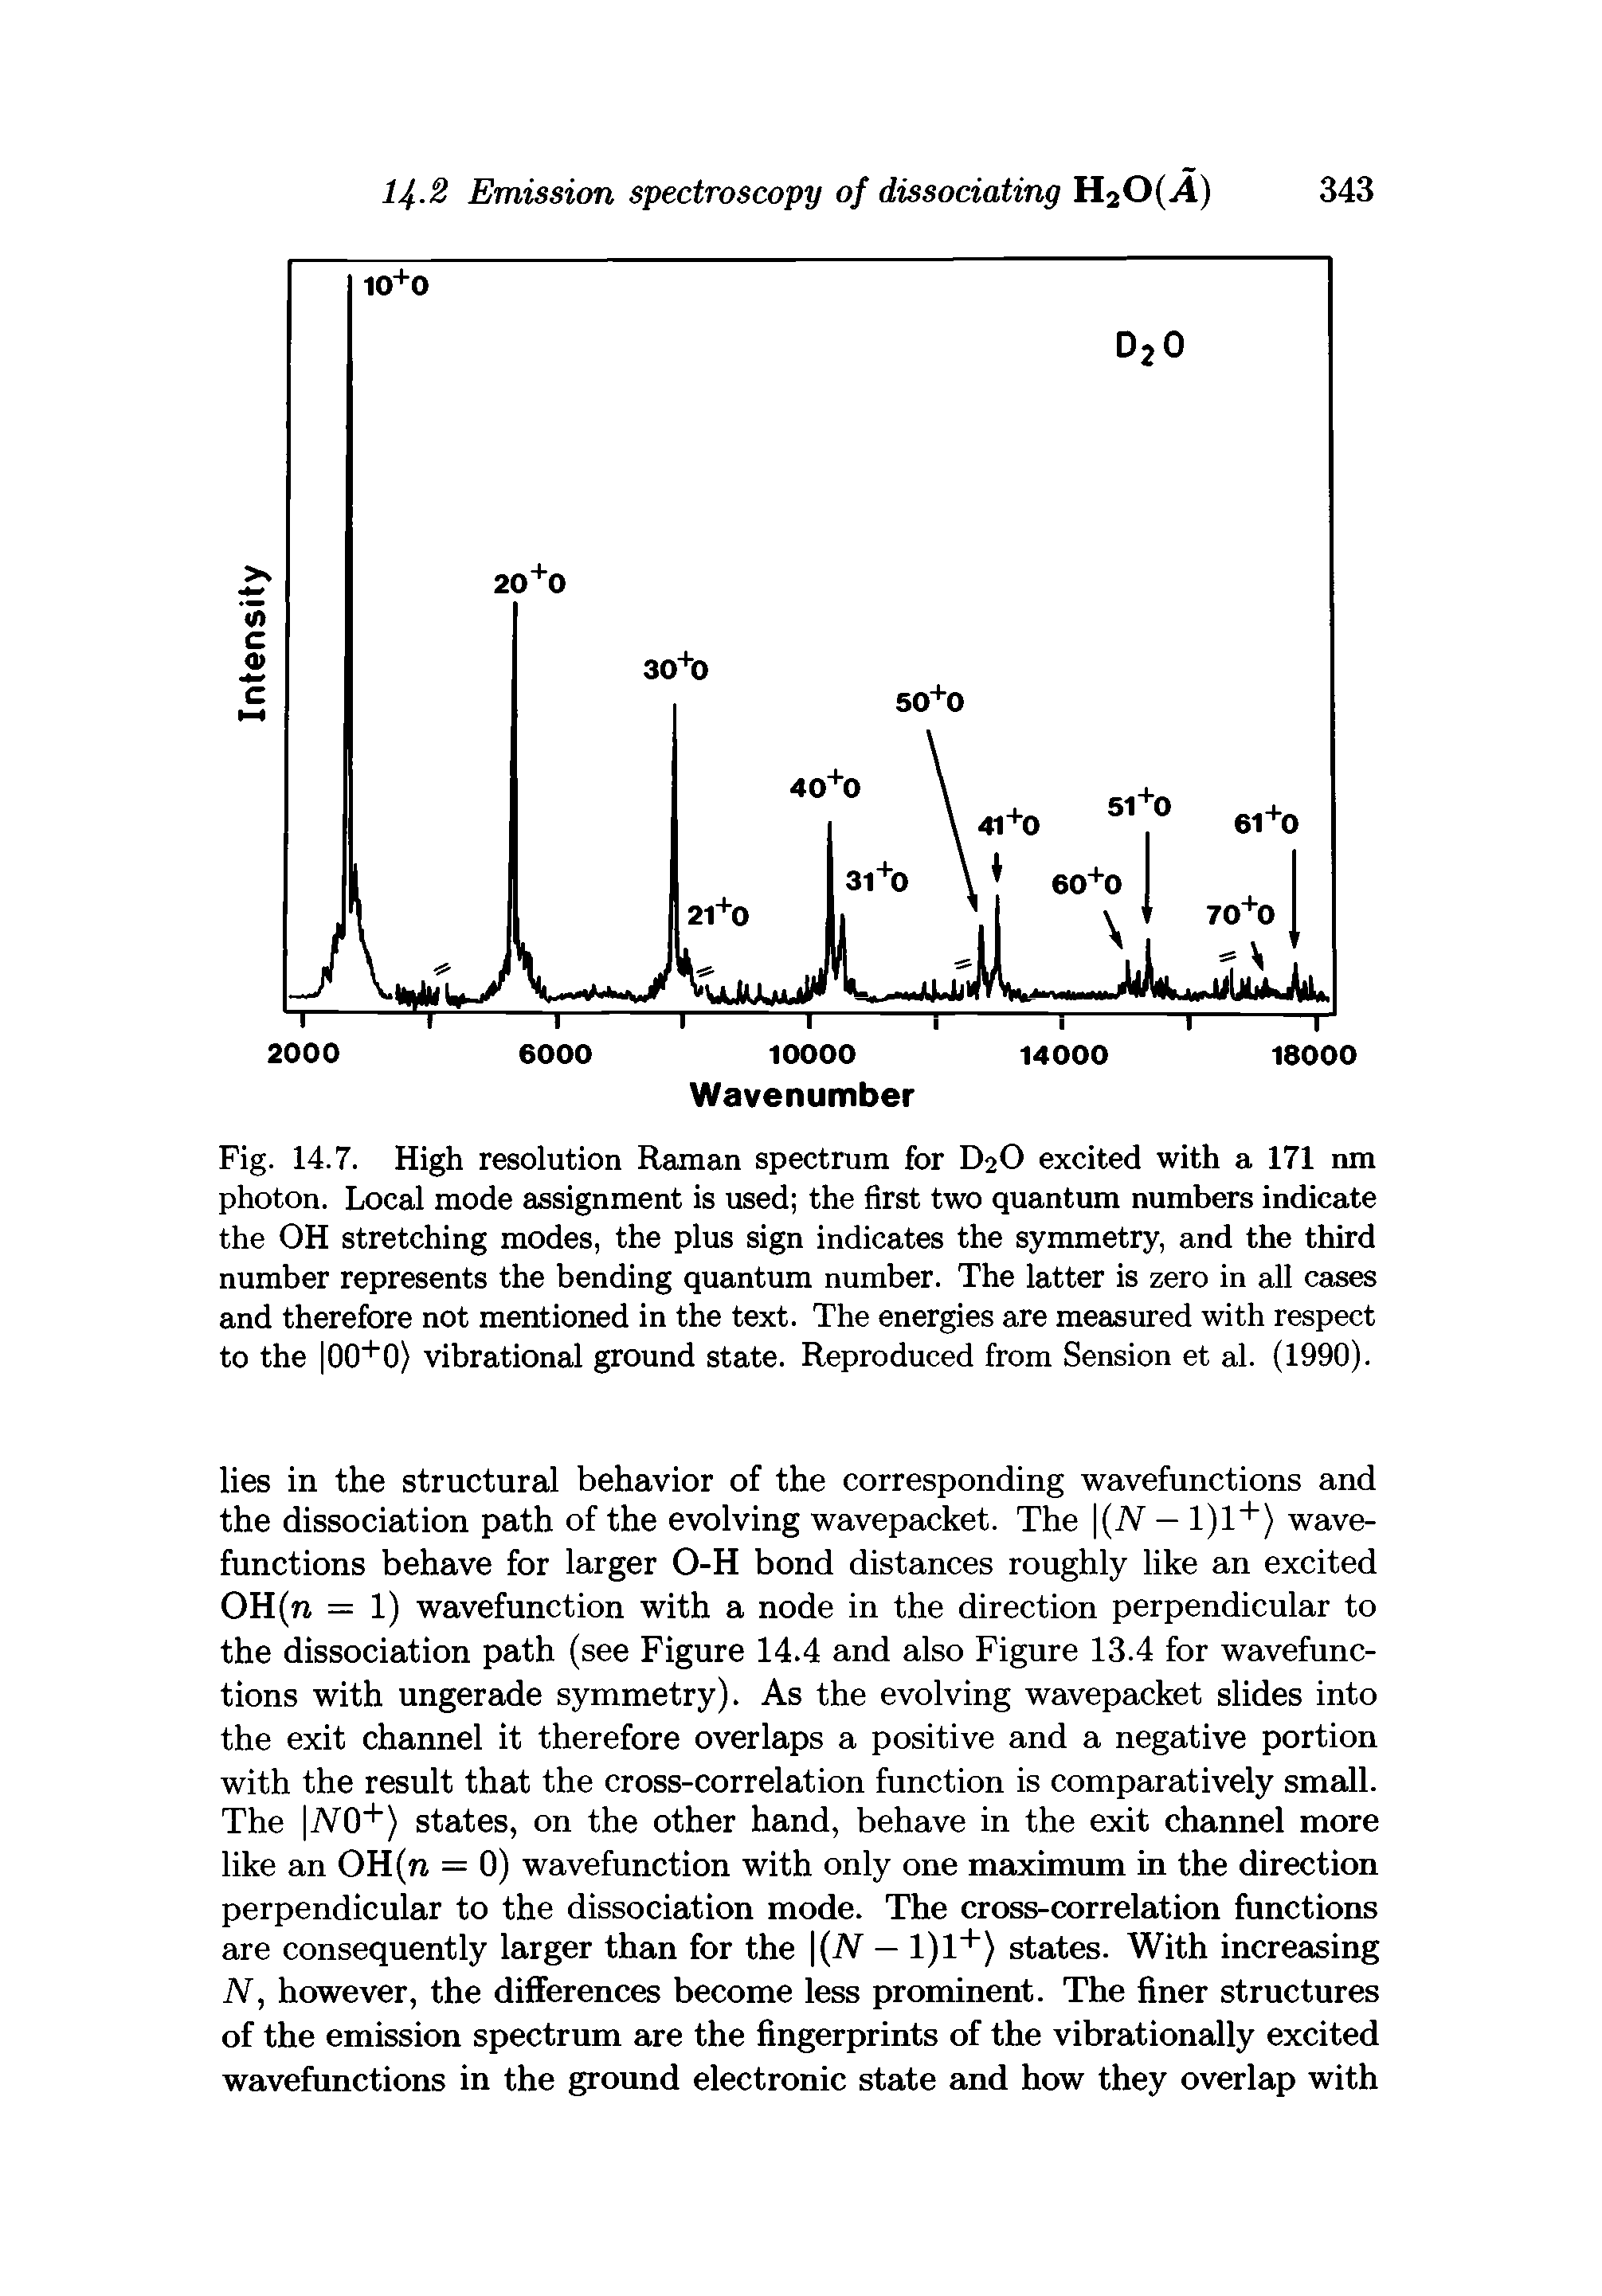 Fig. 14.7. High resolution Raman spectrum for D20 excited with a 171 nm photon. Local mode assignment is used the first two quantum numbers indicate the OH stretching modes, the plus sign indicates the symmetry, and the third number represents the bending quantum number. The latter is zero in all cases and therefore not mentioned in the text. The energies are measured with respect to the 00+0) vibrational ground state. Reproduced from Sension et al. (1990).